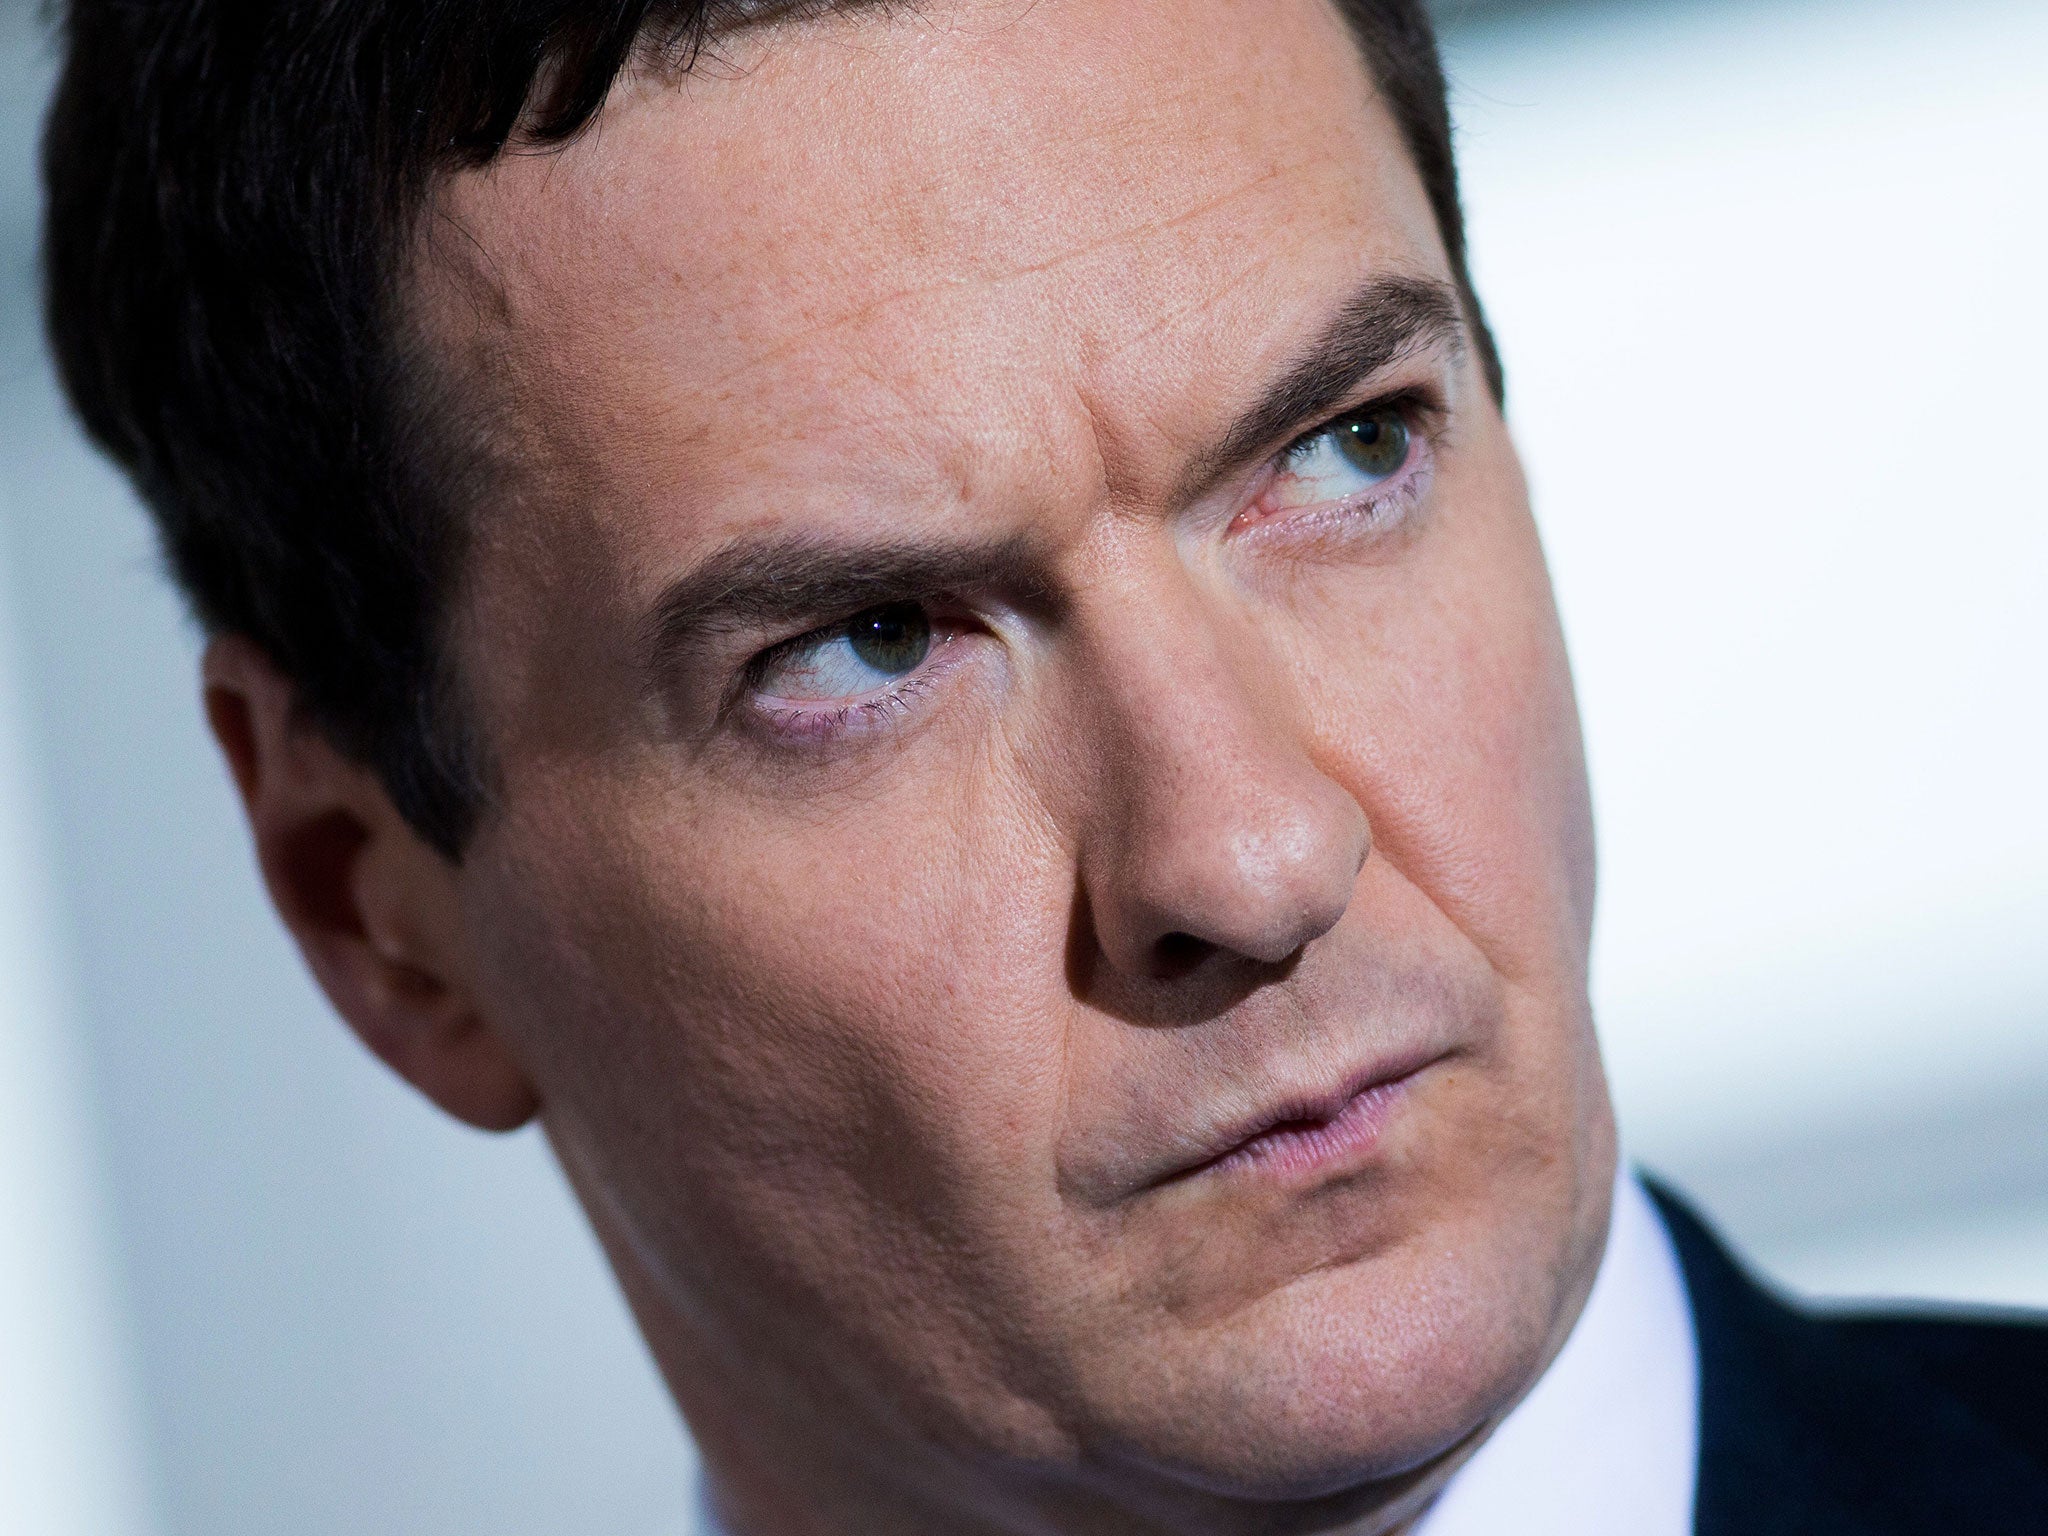 George Osborne says Britain must not 'lose its nerve' on spending cuts